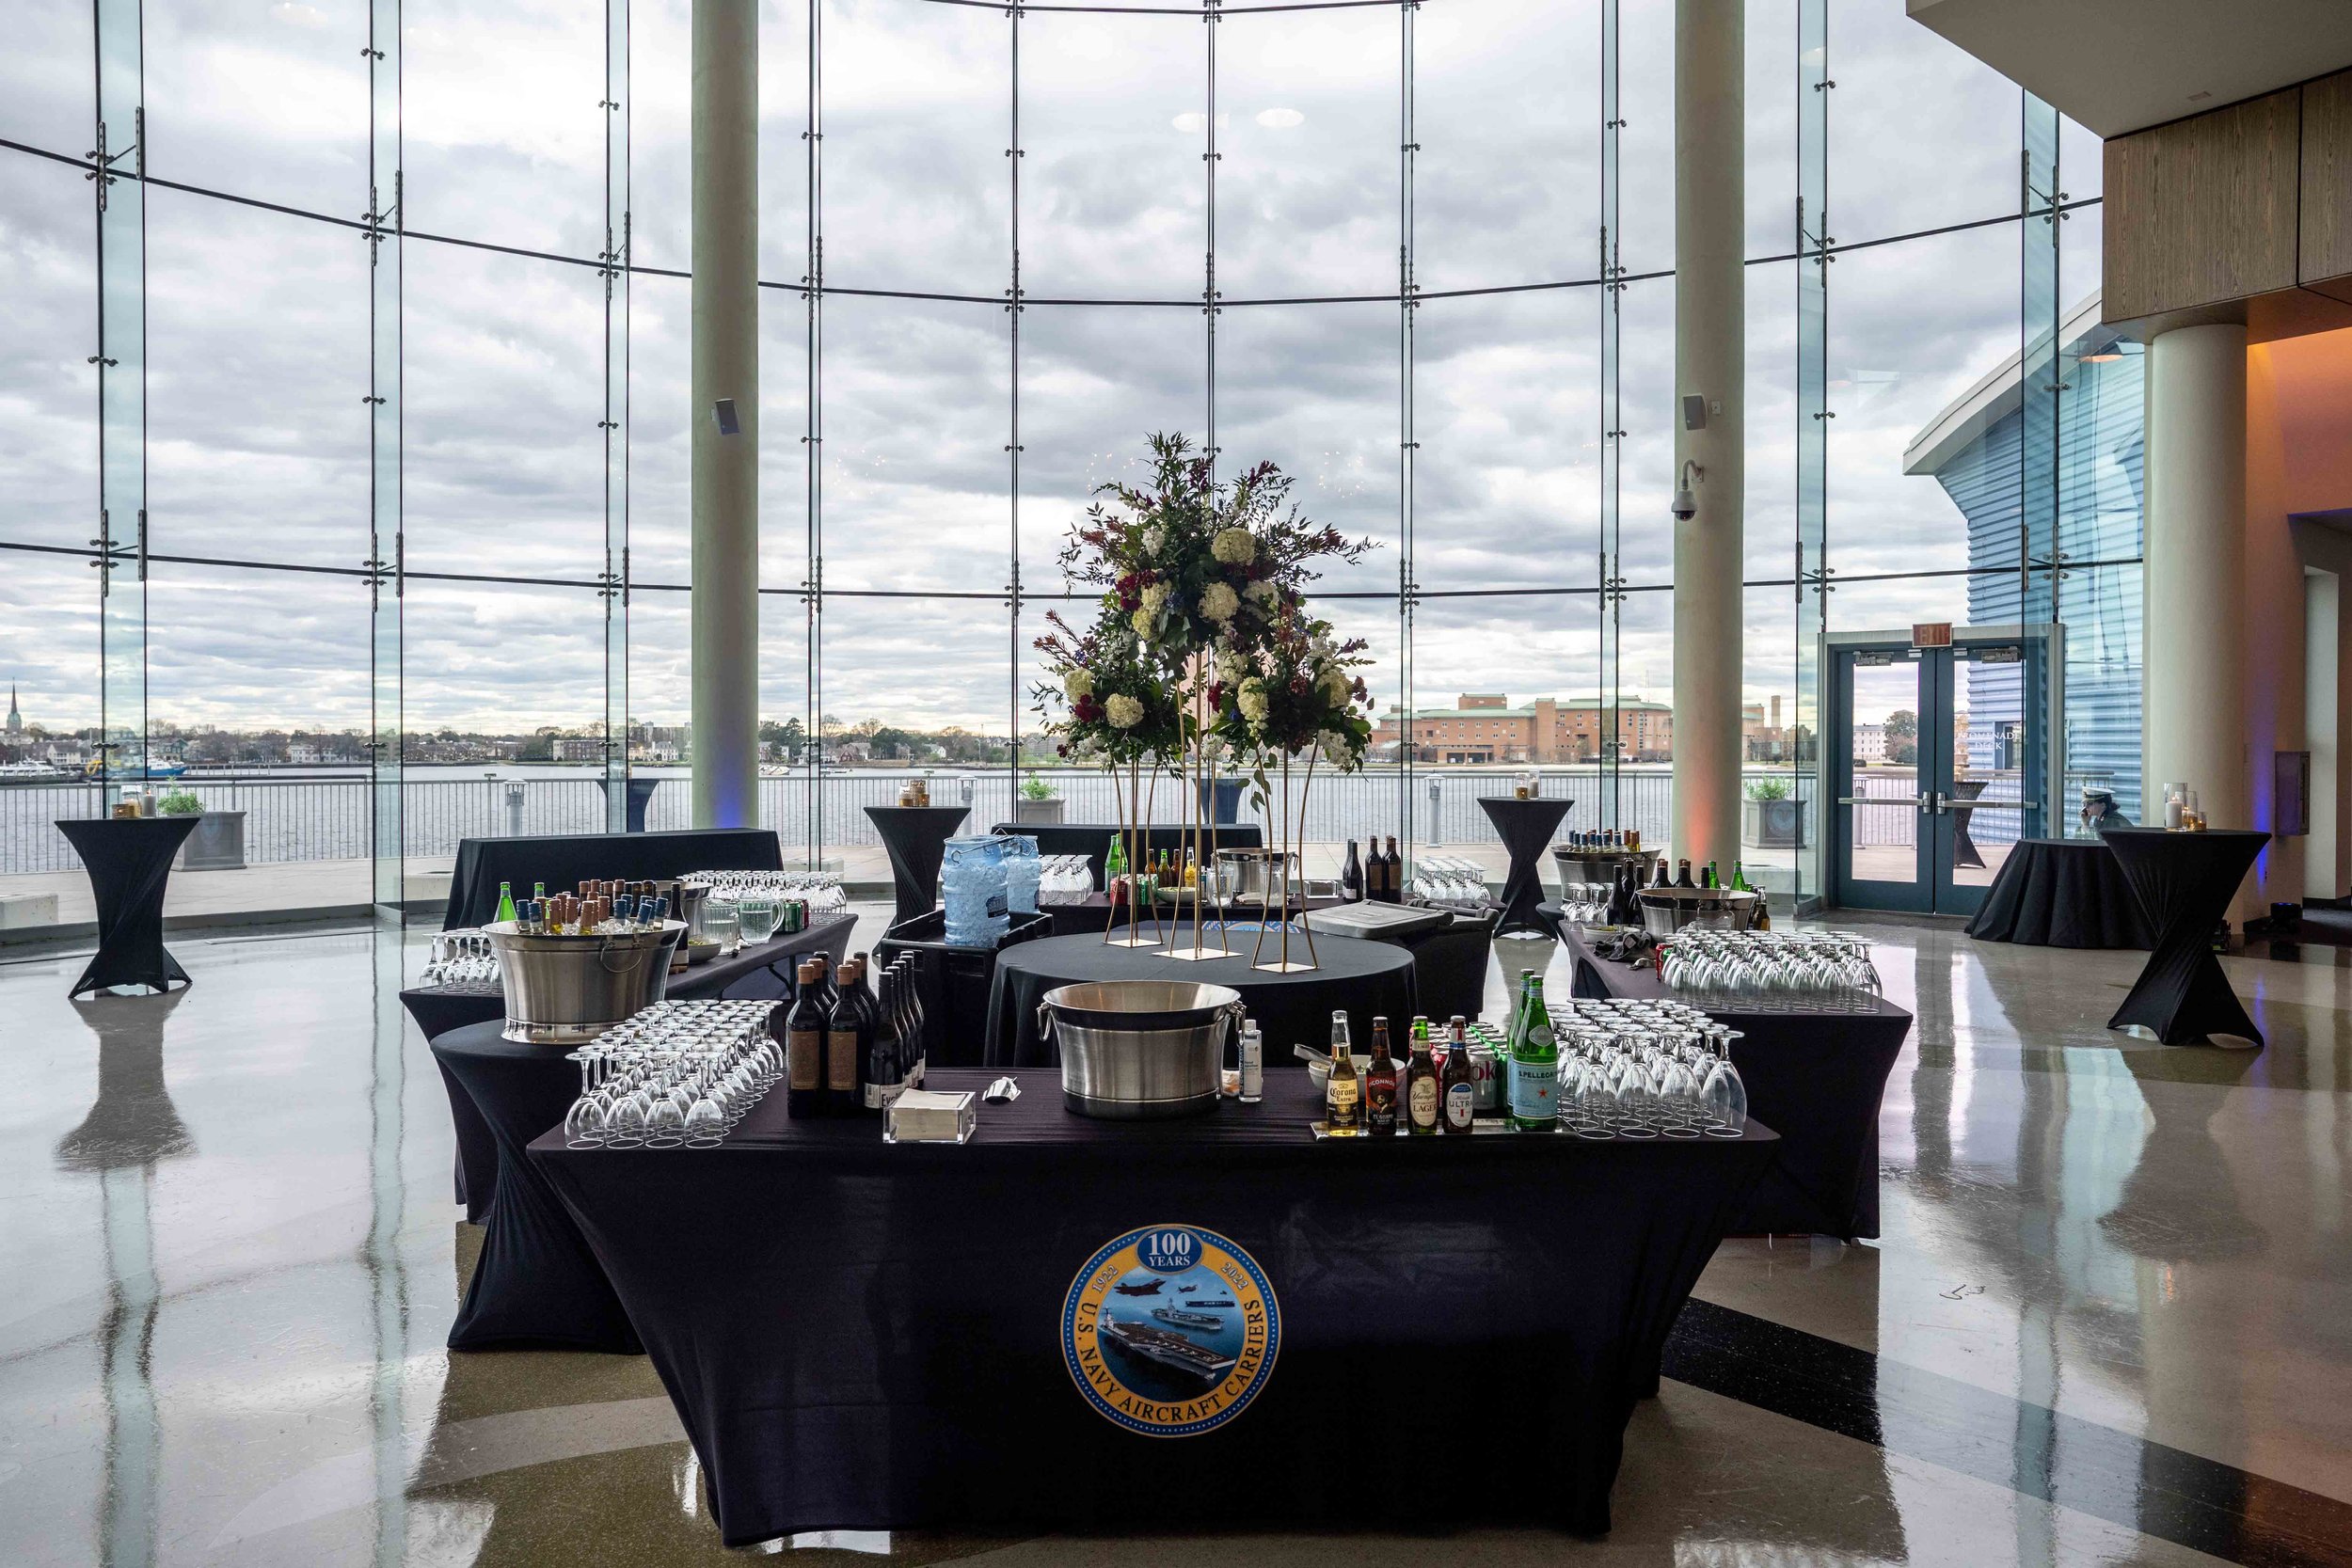 Cocktail Hour Bar at Naval Event